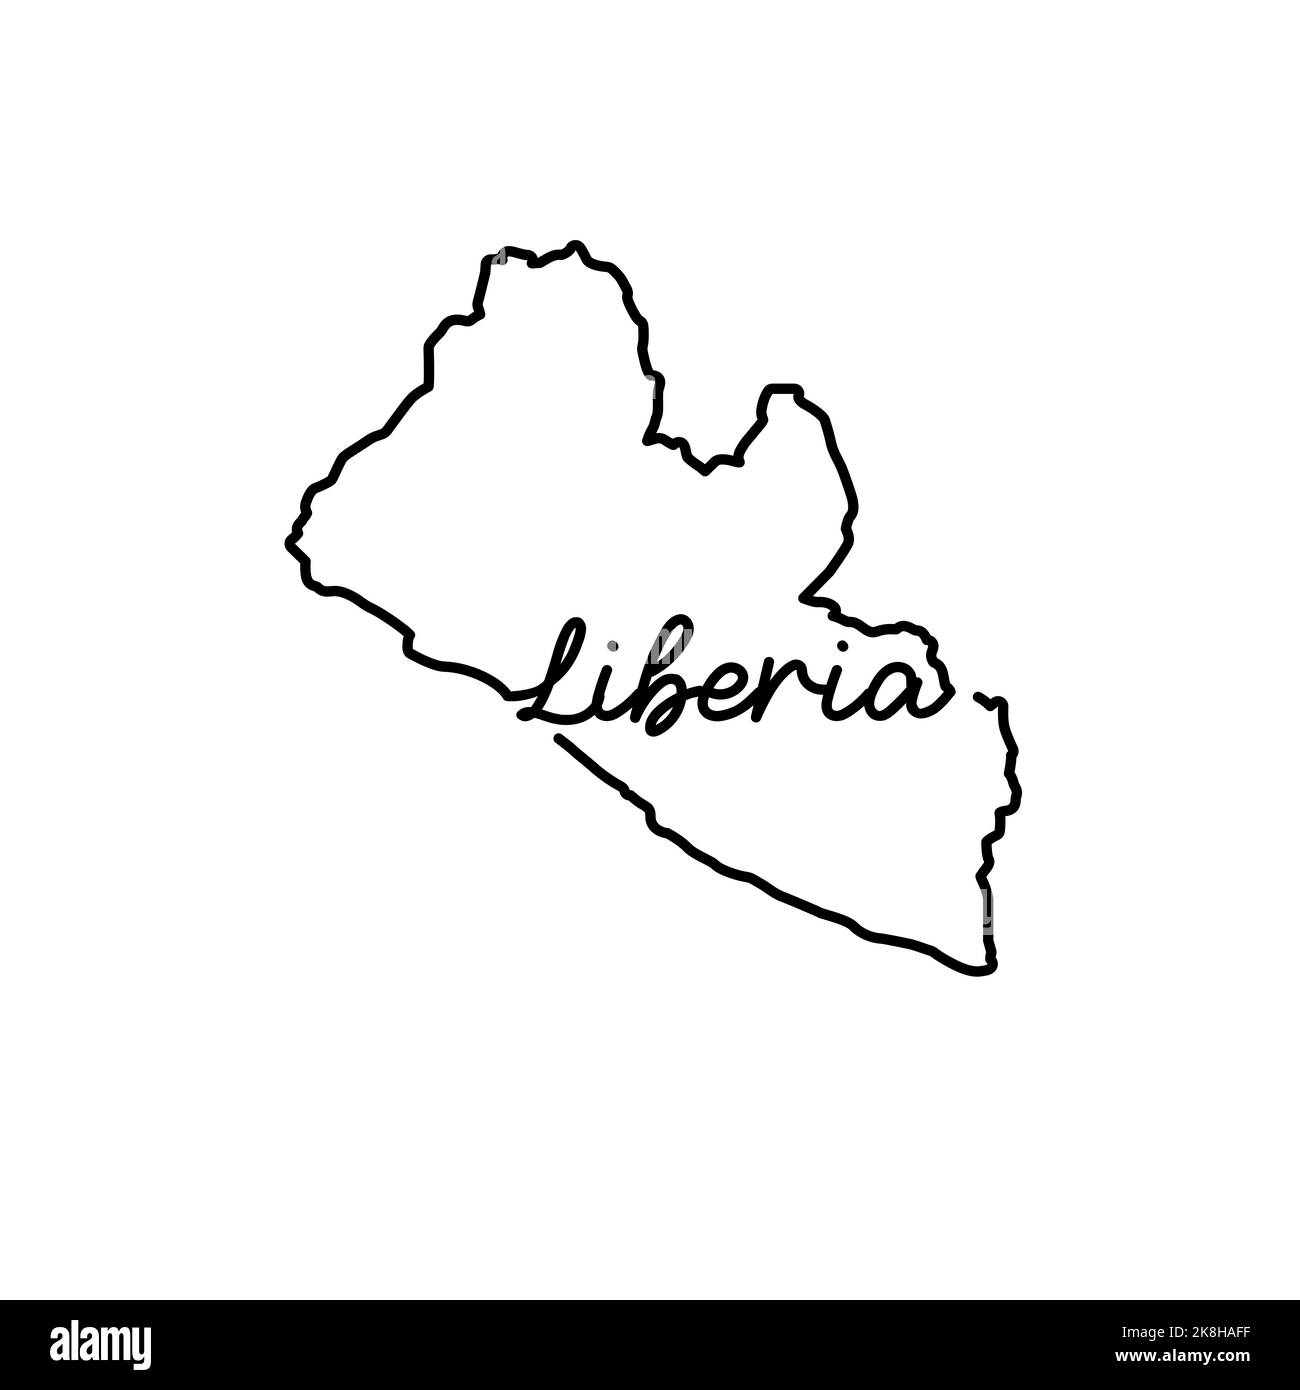 Liberia outline map with the handwritten country name. Continuous line drawing of patriotic home sign. A love for a small homeland. T-shirt print idea Stock Photo